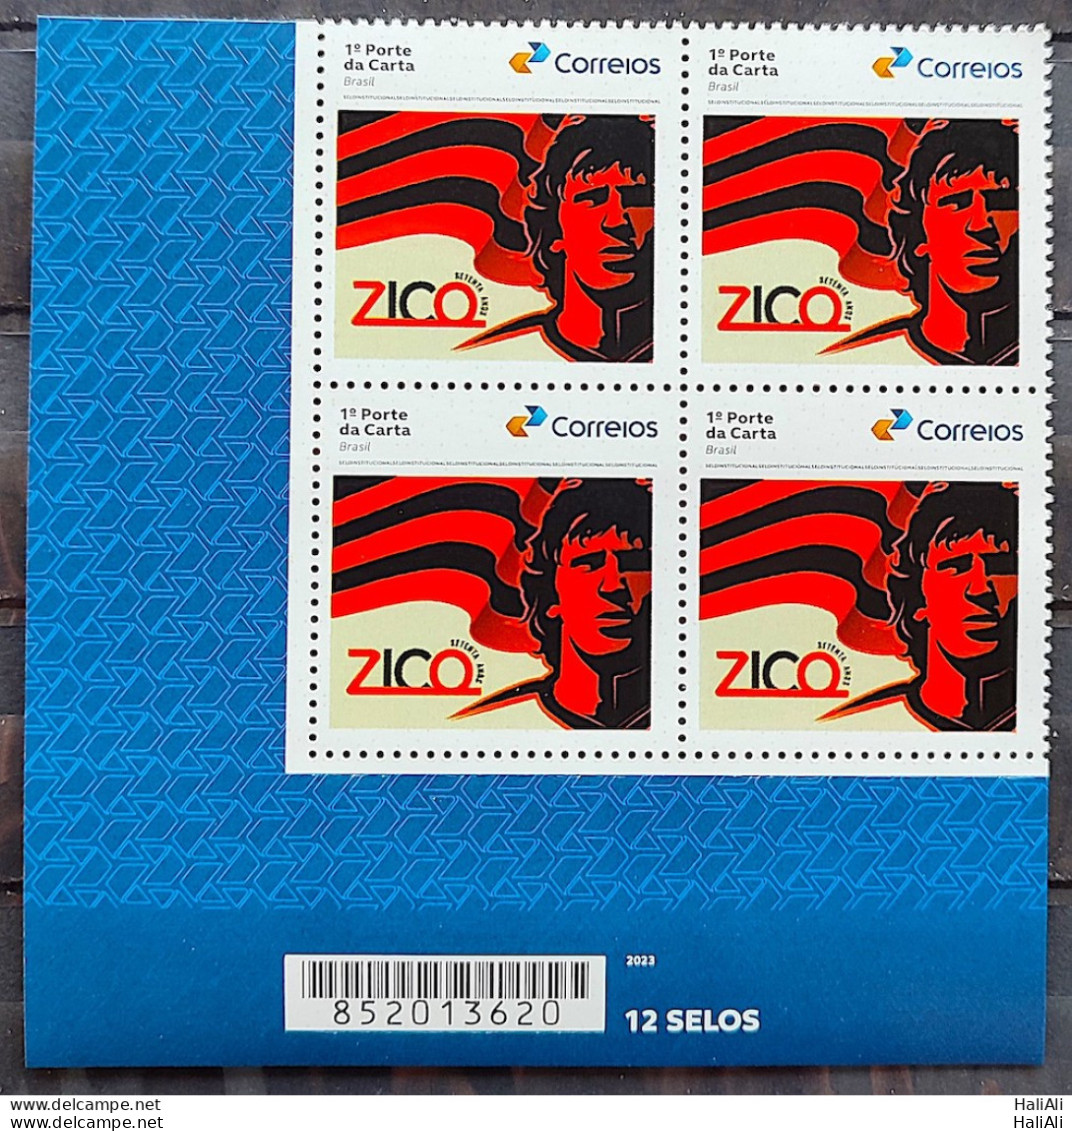 SI 03 Brazil Institutional Stamp Zico 70 Years Flamengo Soccer Football 2023 Block Of 4 Bar Code - Personalized Stamps